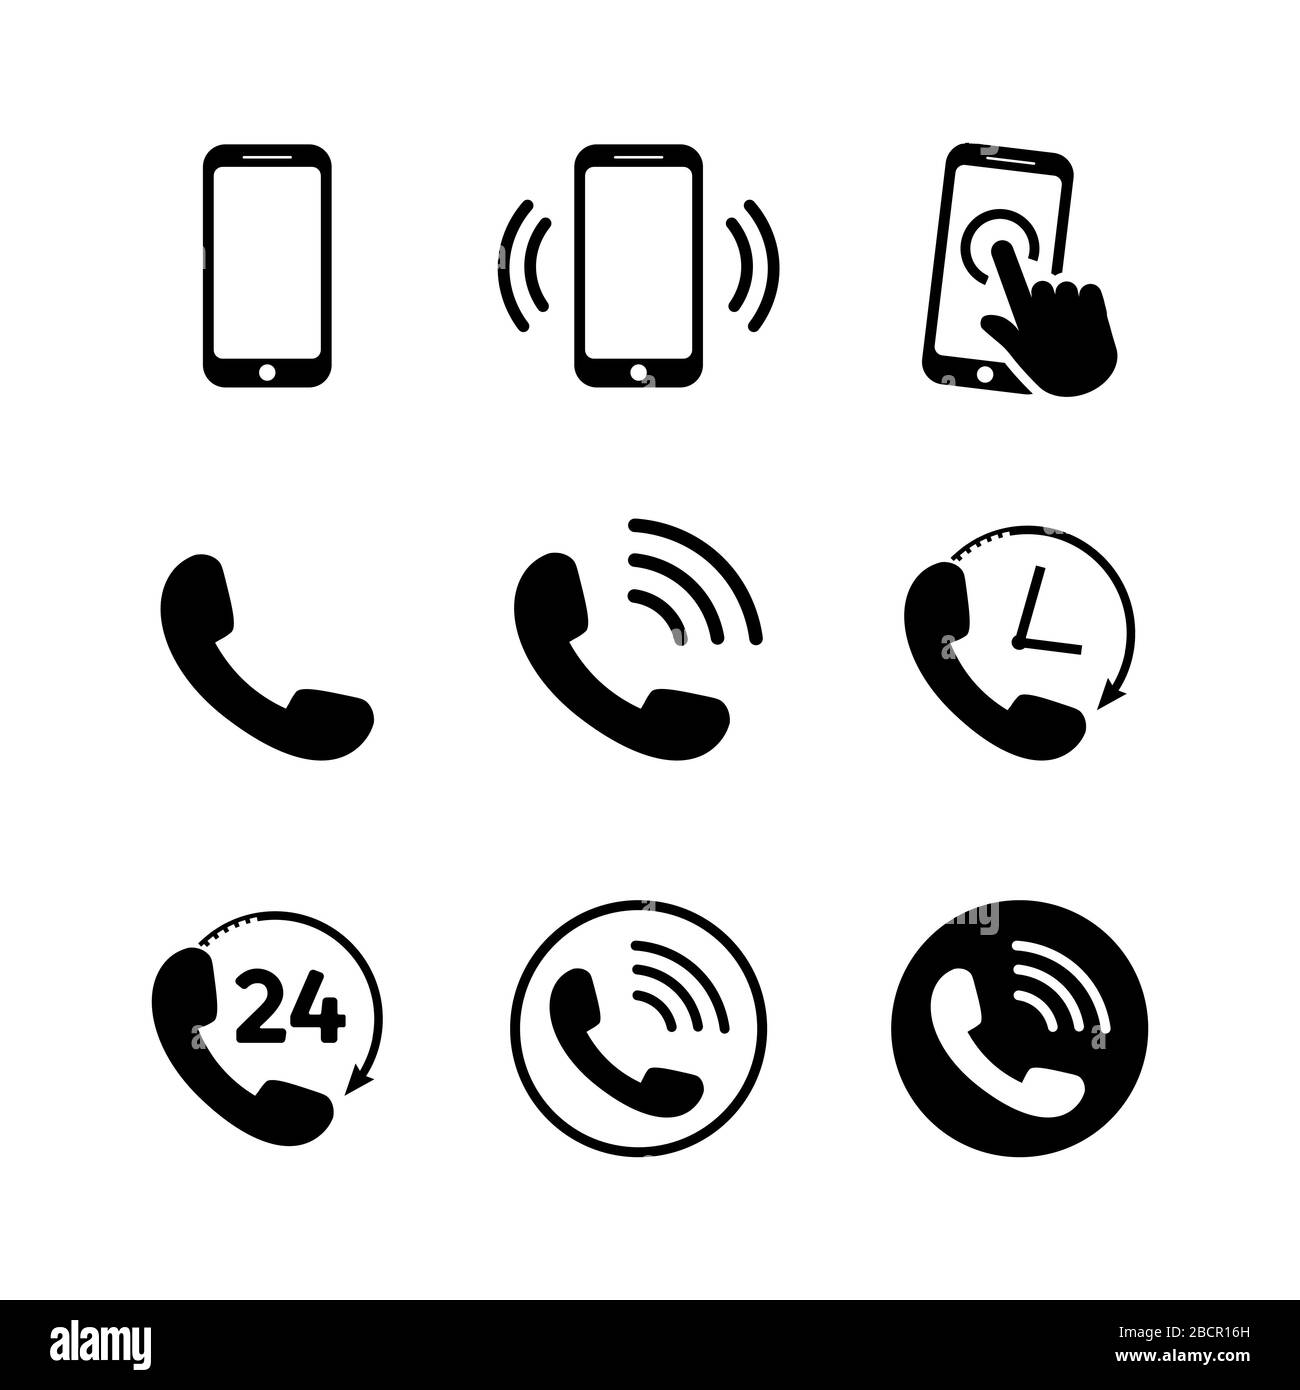 Phone icon set. Mobile and phone symbols in flat Stock Vector Image ...